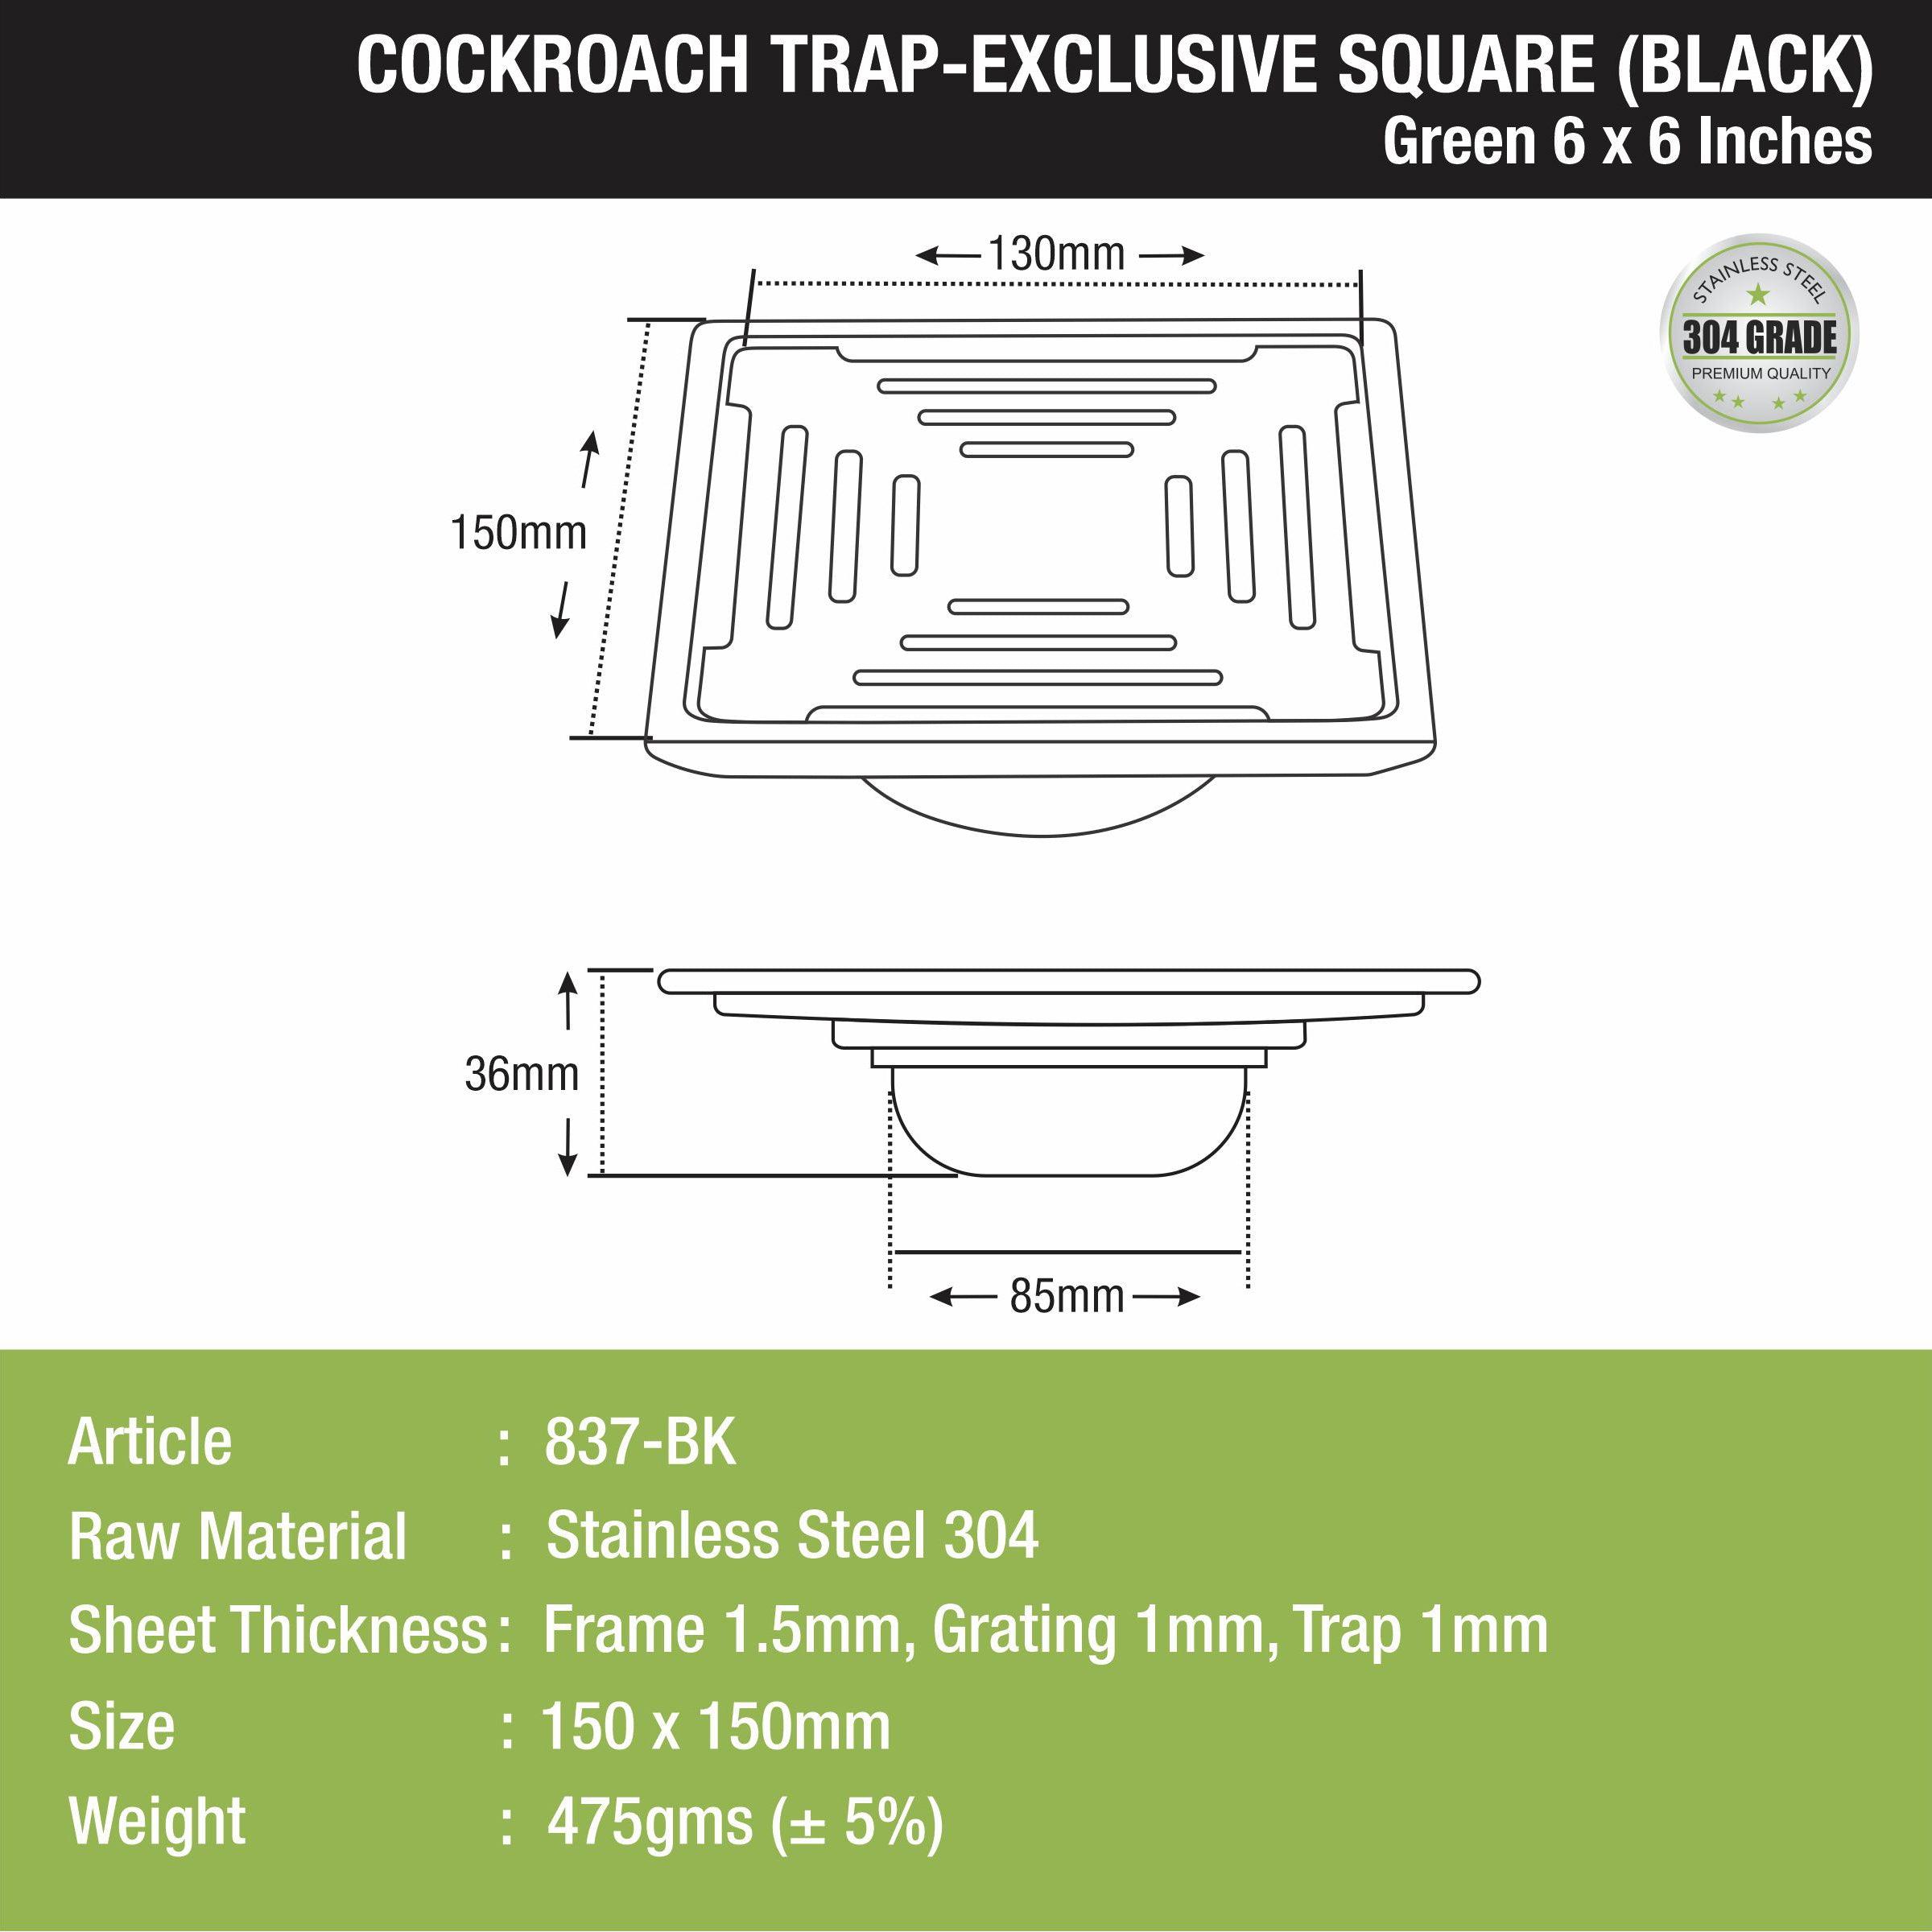 Green Exclusive Square Floor Drain in Black PVD Coating (5 x 5 Inches) with Cockroach Trap size and measire